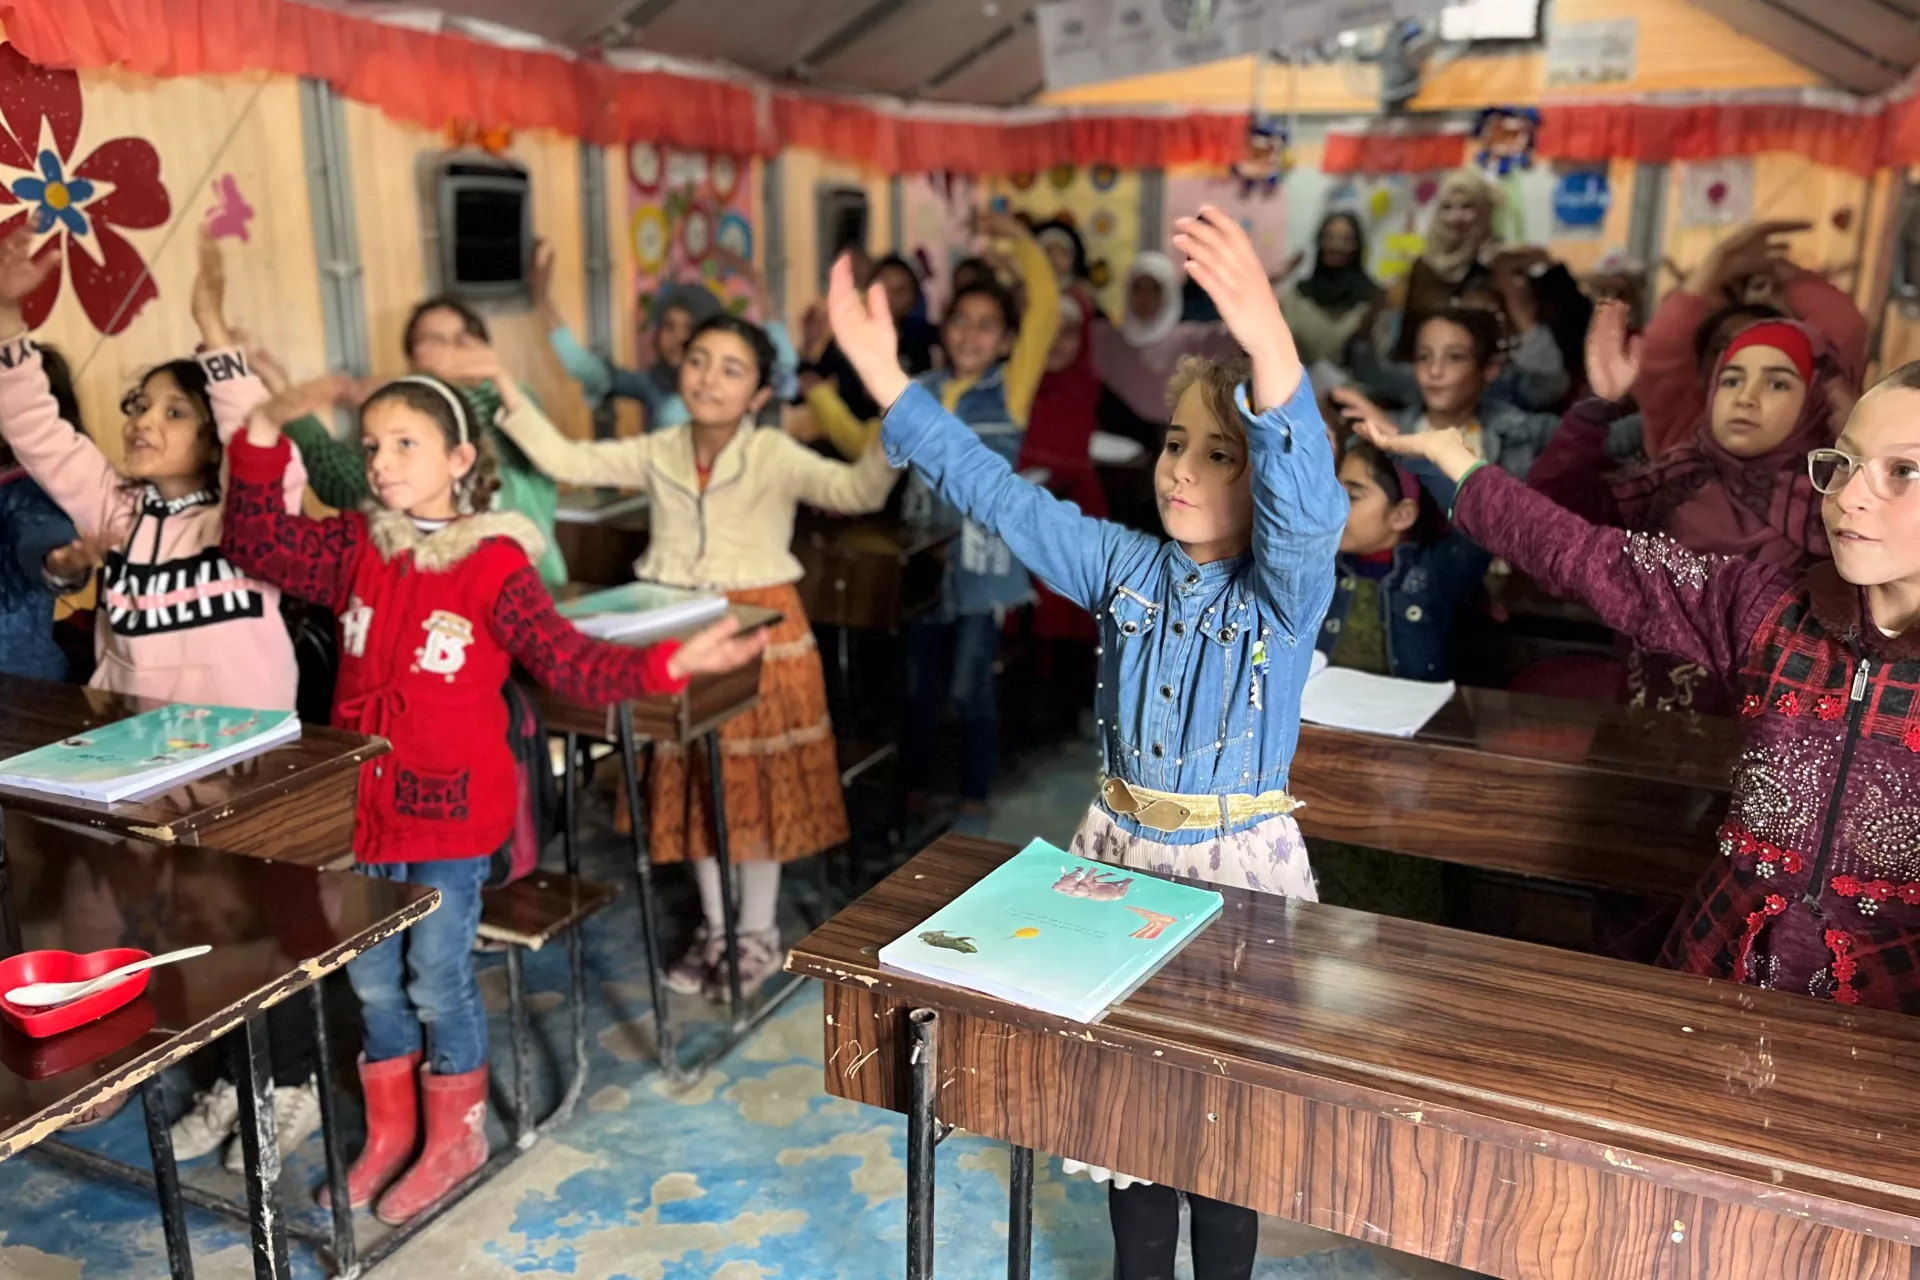 Syria. A group of children raise their arms as they sing along in a classroom.